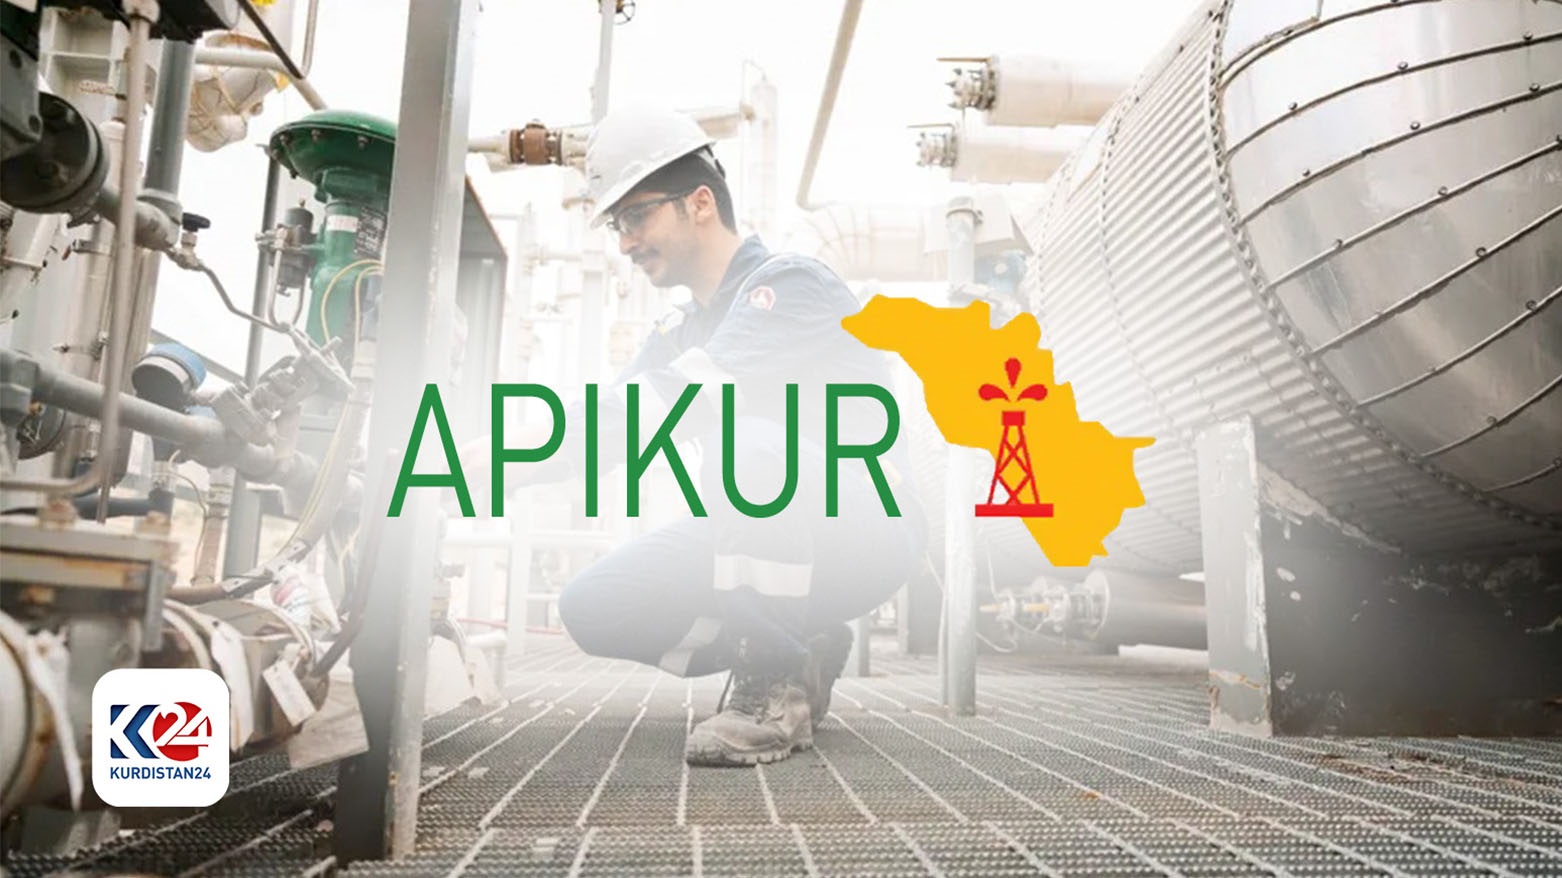 The Association of the Petroleum Industry of Kurdistan (APIKUR) welcomed its eighth member on Thursday. (Photo: APIKUR/K24)